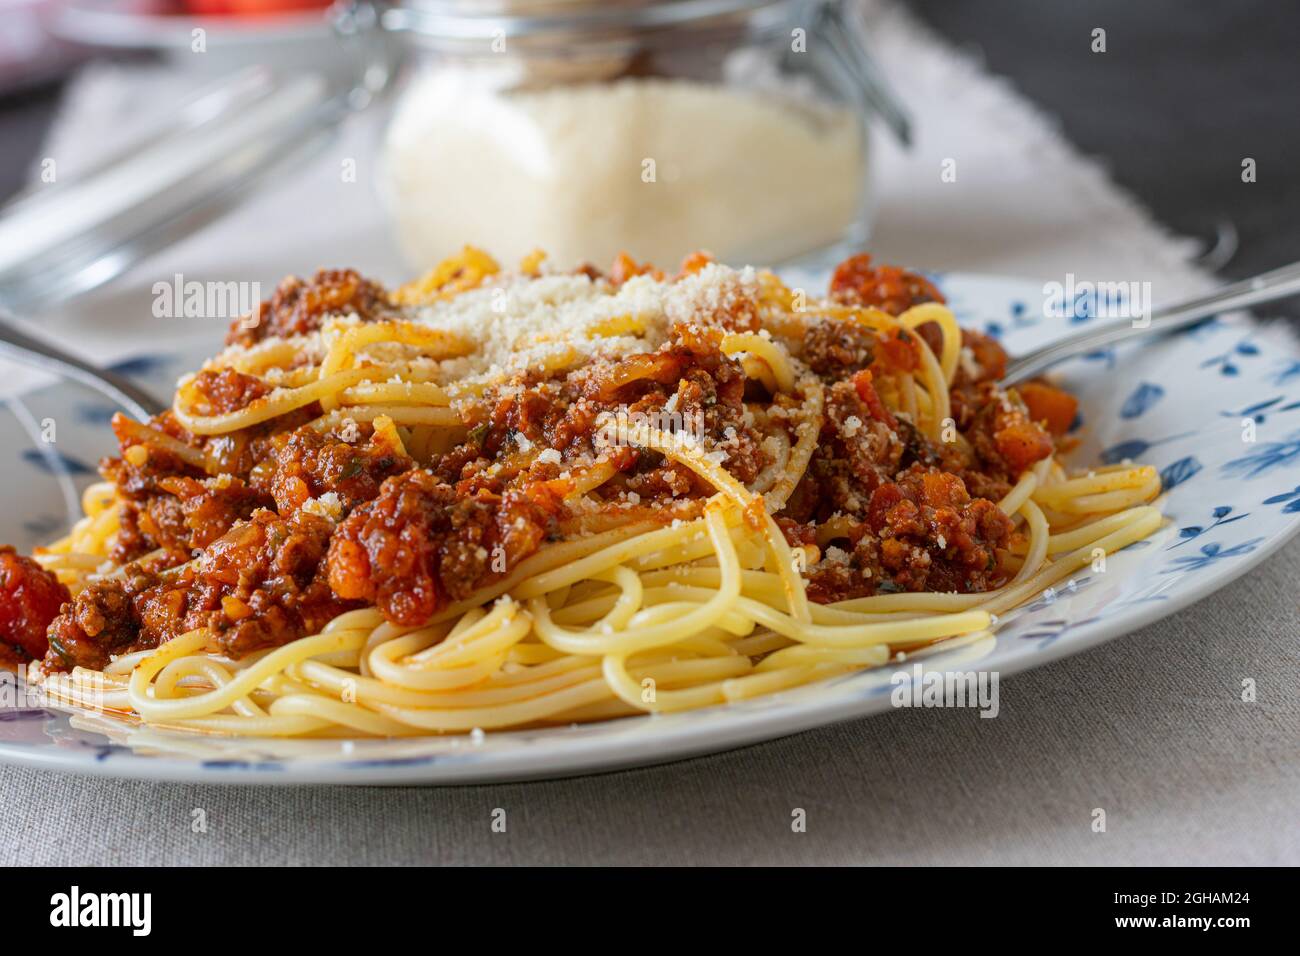 Spaghetti Bolognese with parmesan cheese on kitchen table background. Closeup and front view. Bright image Stock Photo